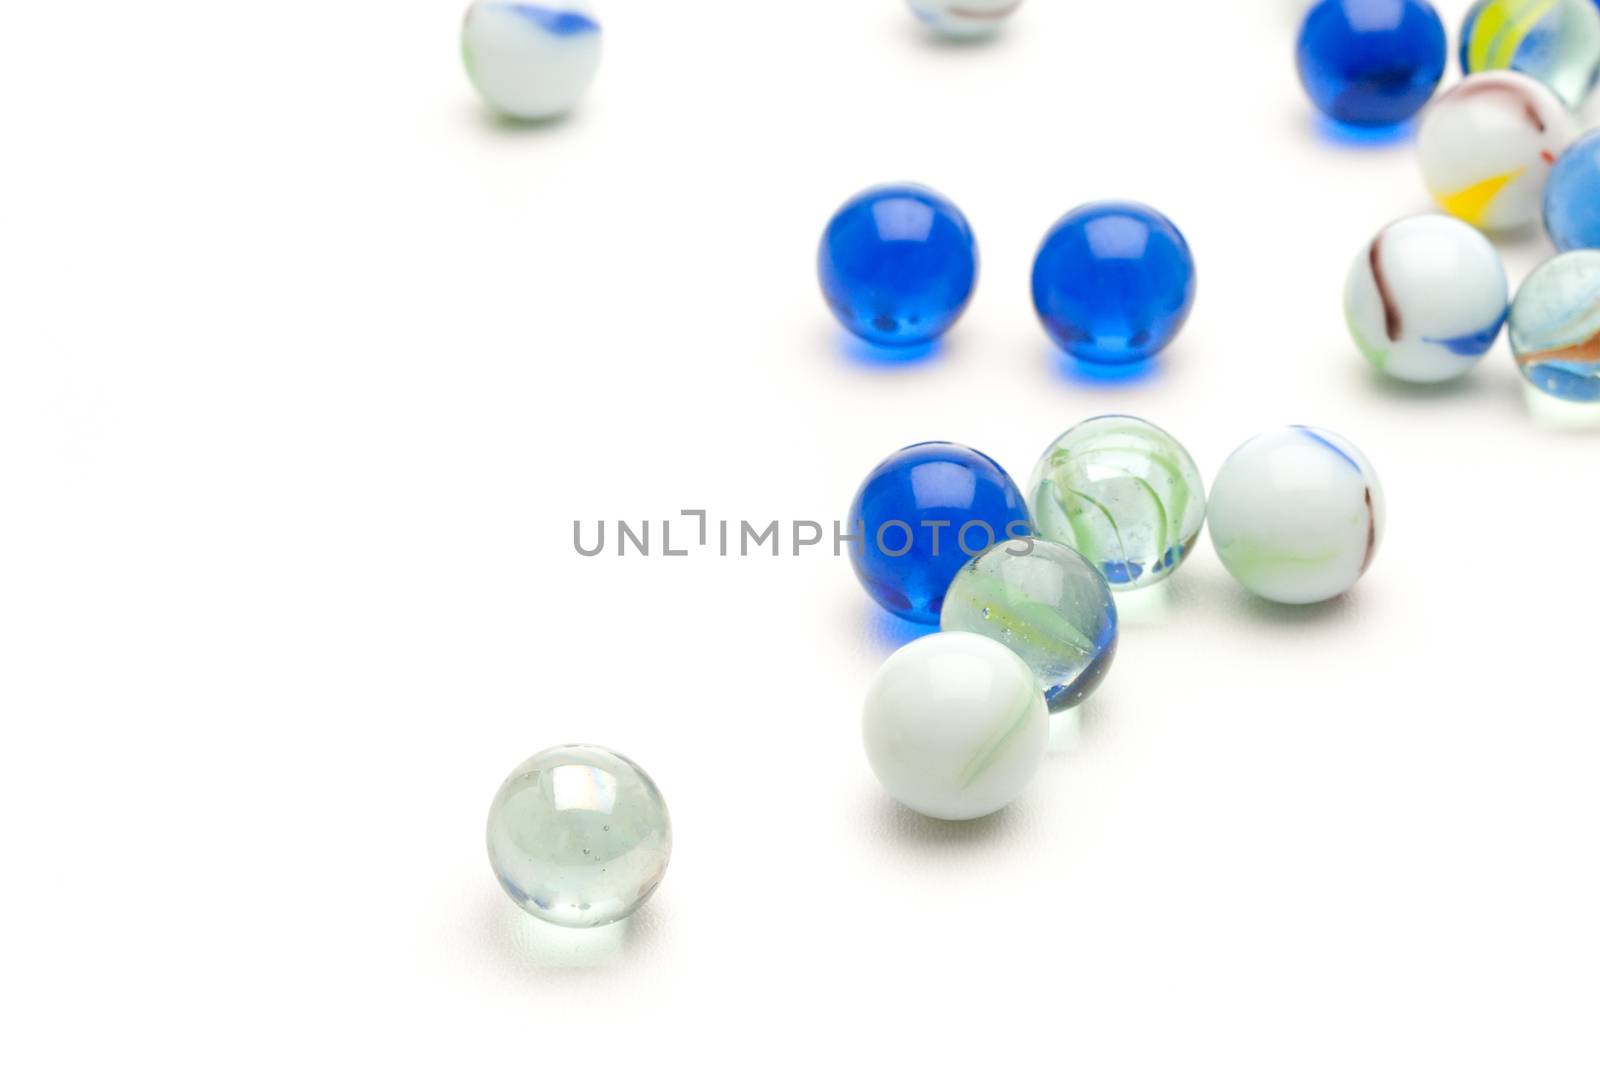 photo of different color marbles on white